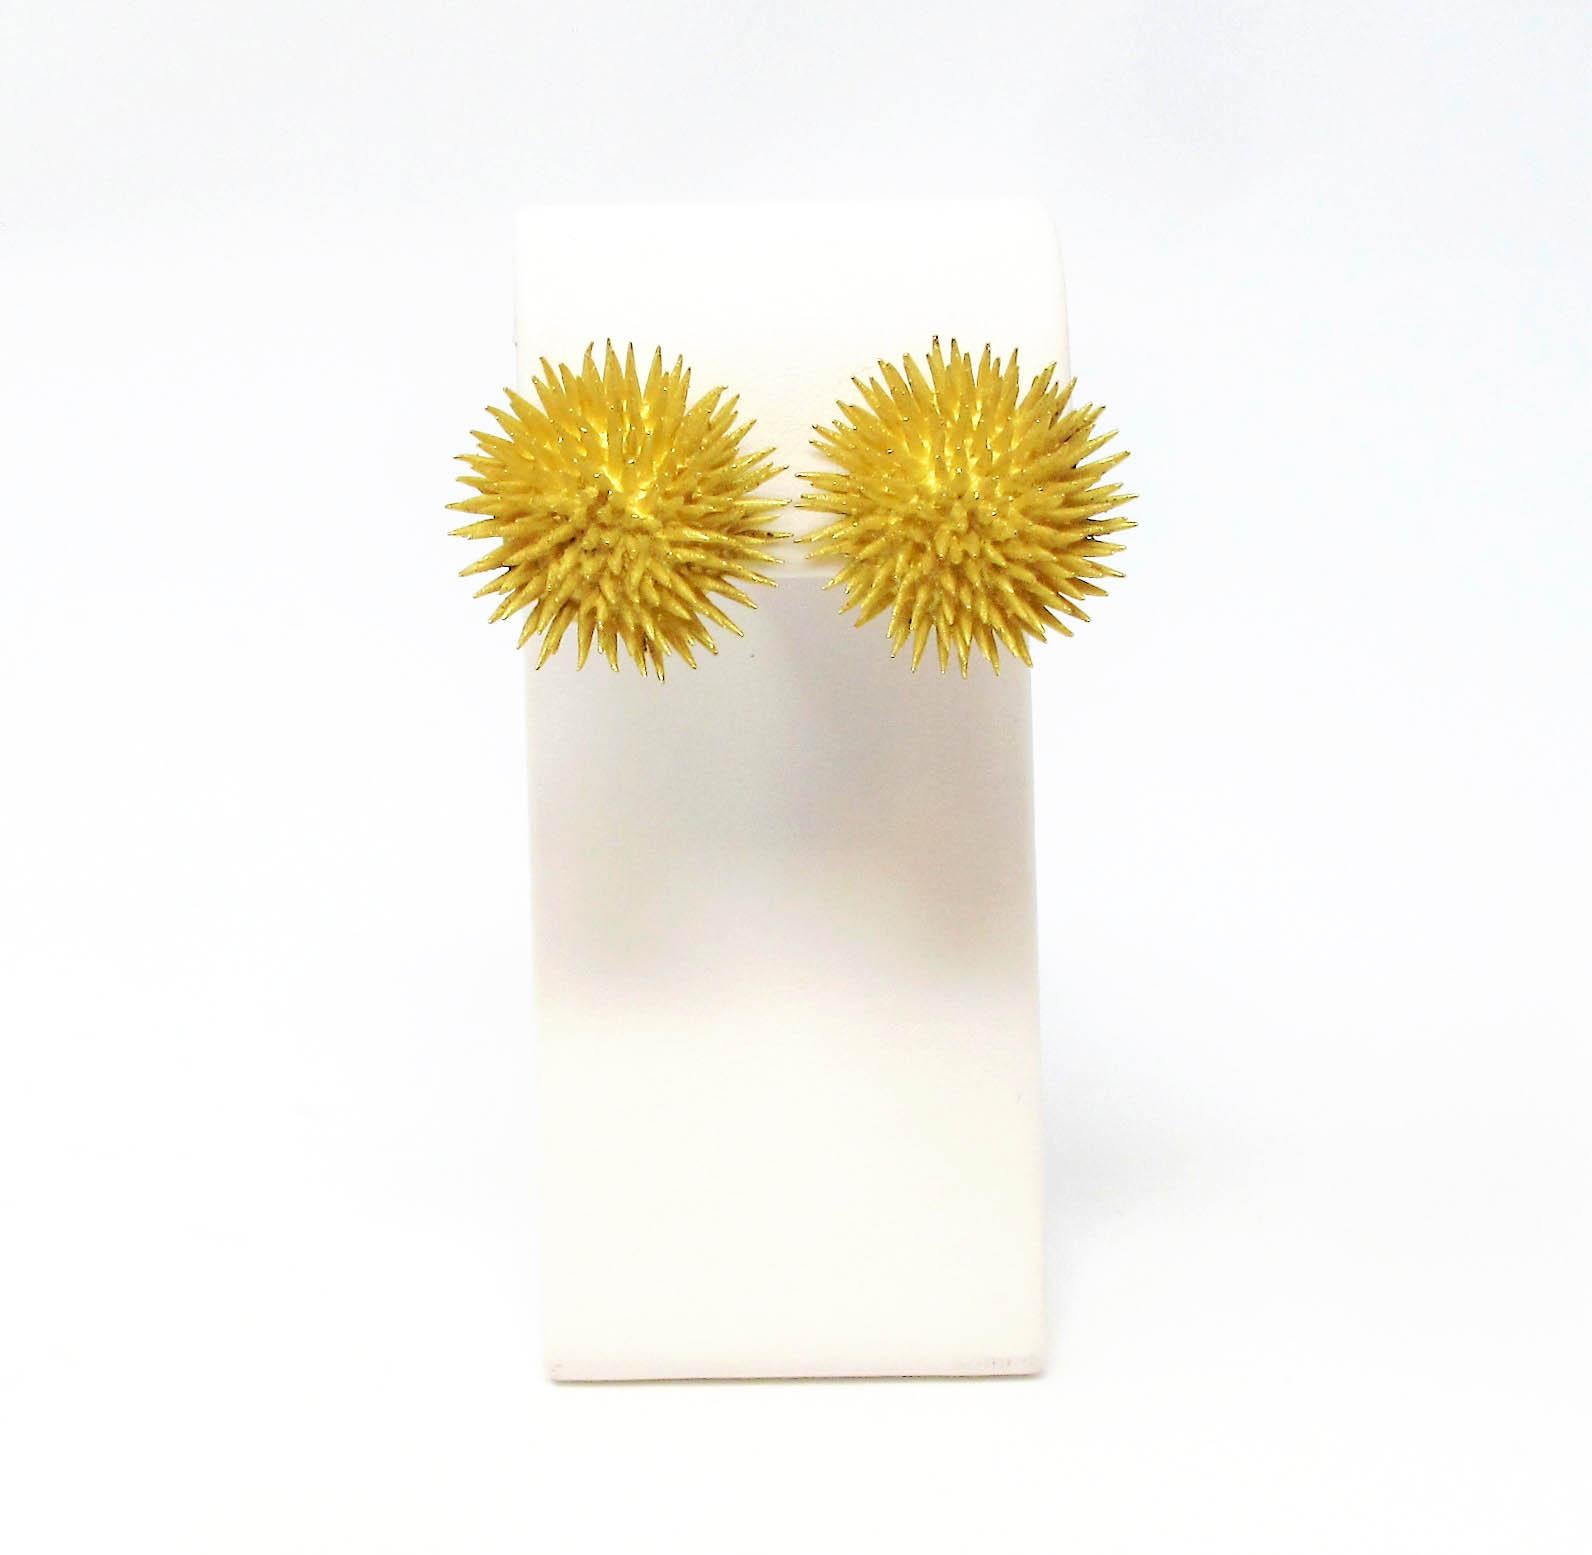 Incredible bold, vintage clip-on earrings from esteemed jeweler, Tiffany & Co. These chic, life-like sea urchin earrings are made of solid 18 karat yellow gold in a satin finish. The tiny spikes are slightly tapered with sharp, pointed ends while